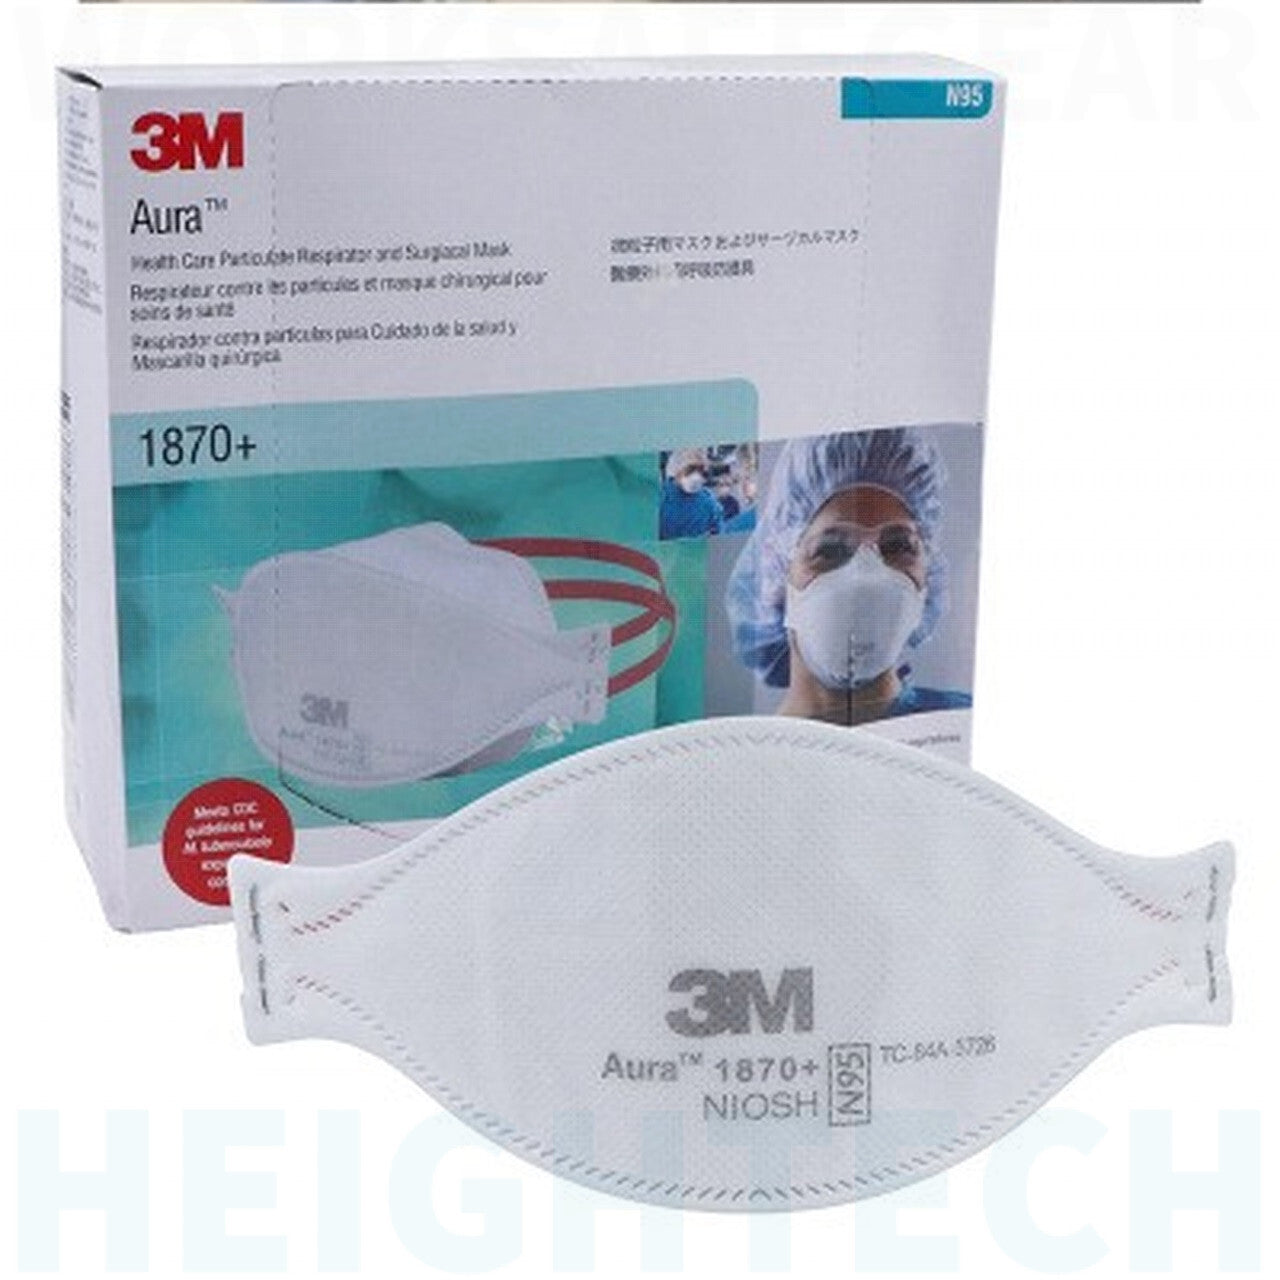 3M 3M Particulate Respirator & Surgical Mask 1870+ N95 - BX/20 Safety & PPE Box of 20 